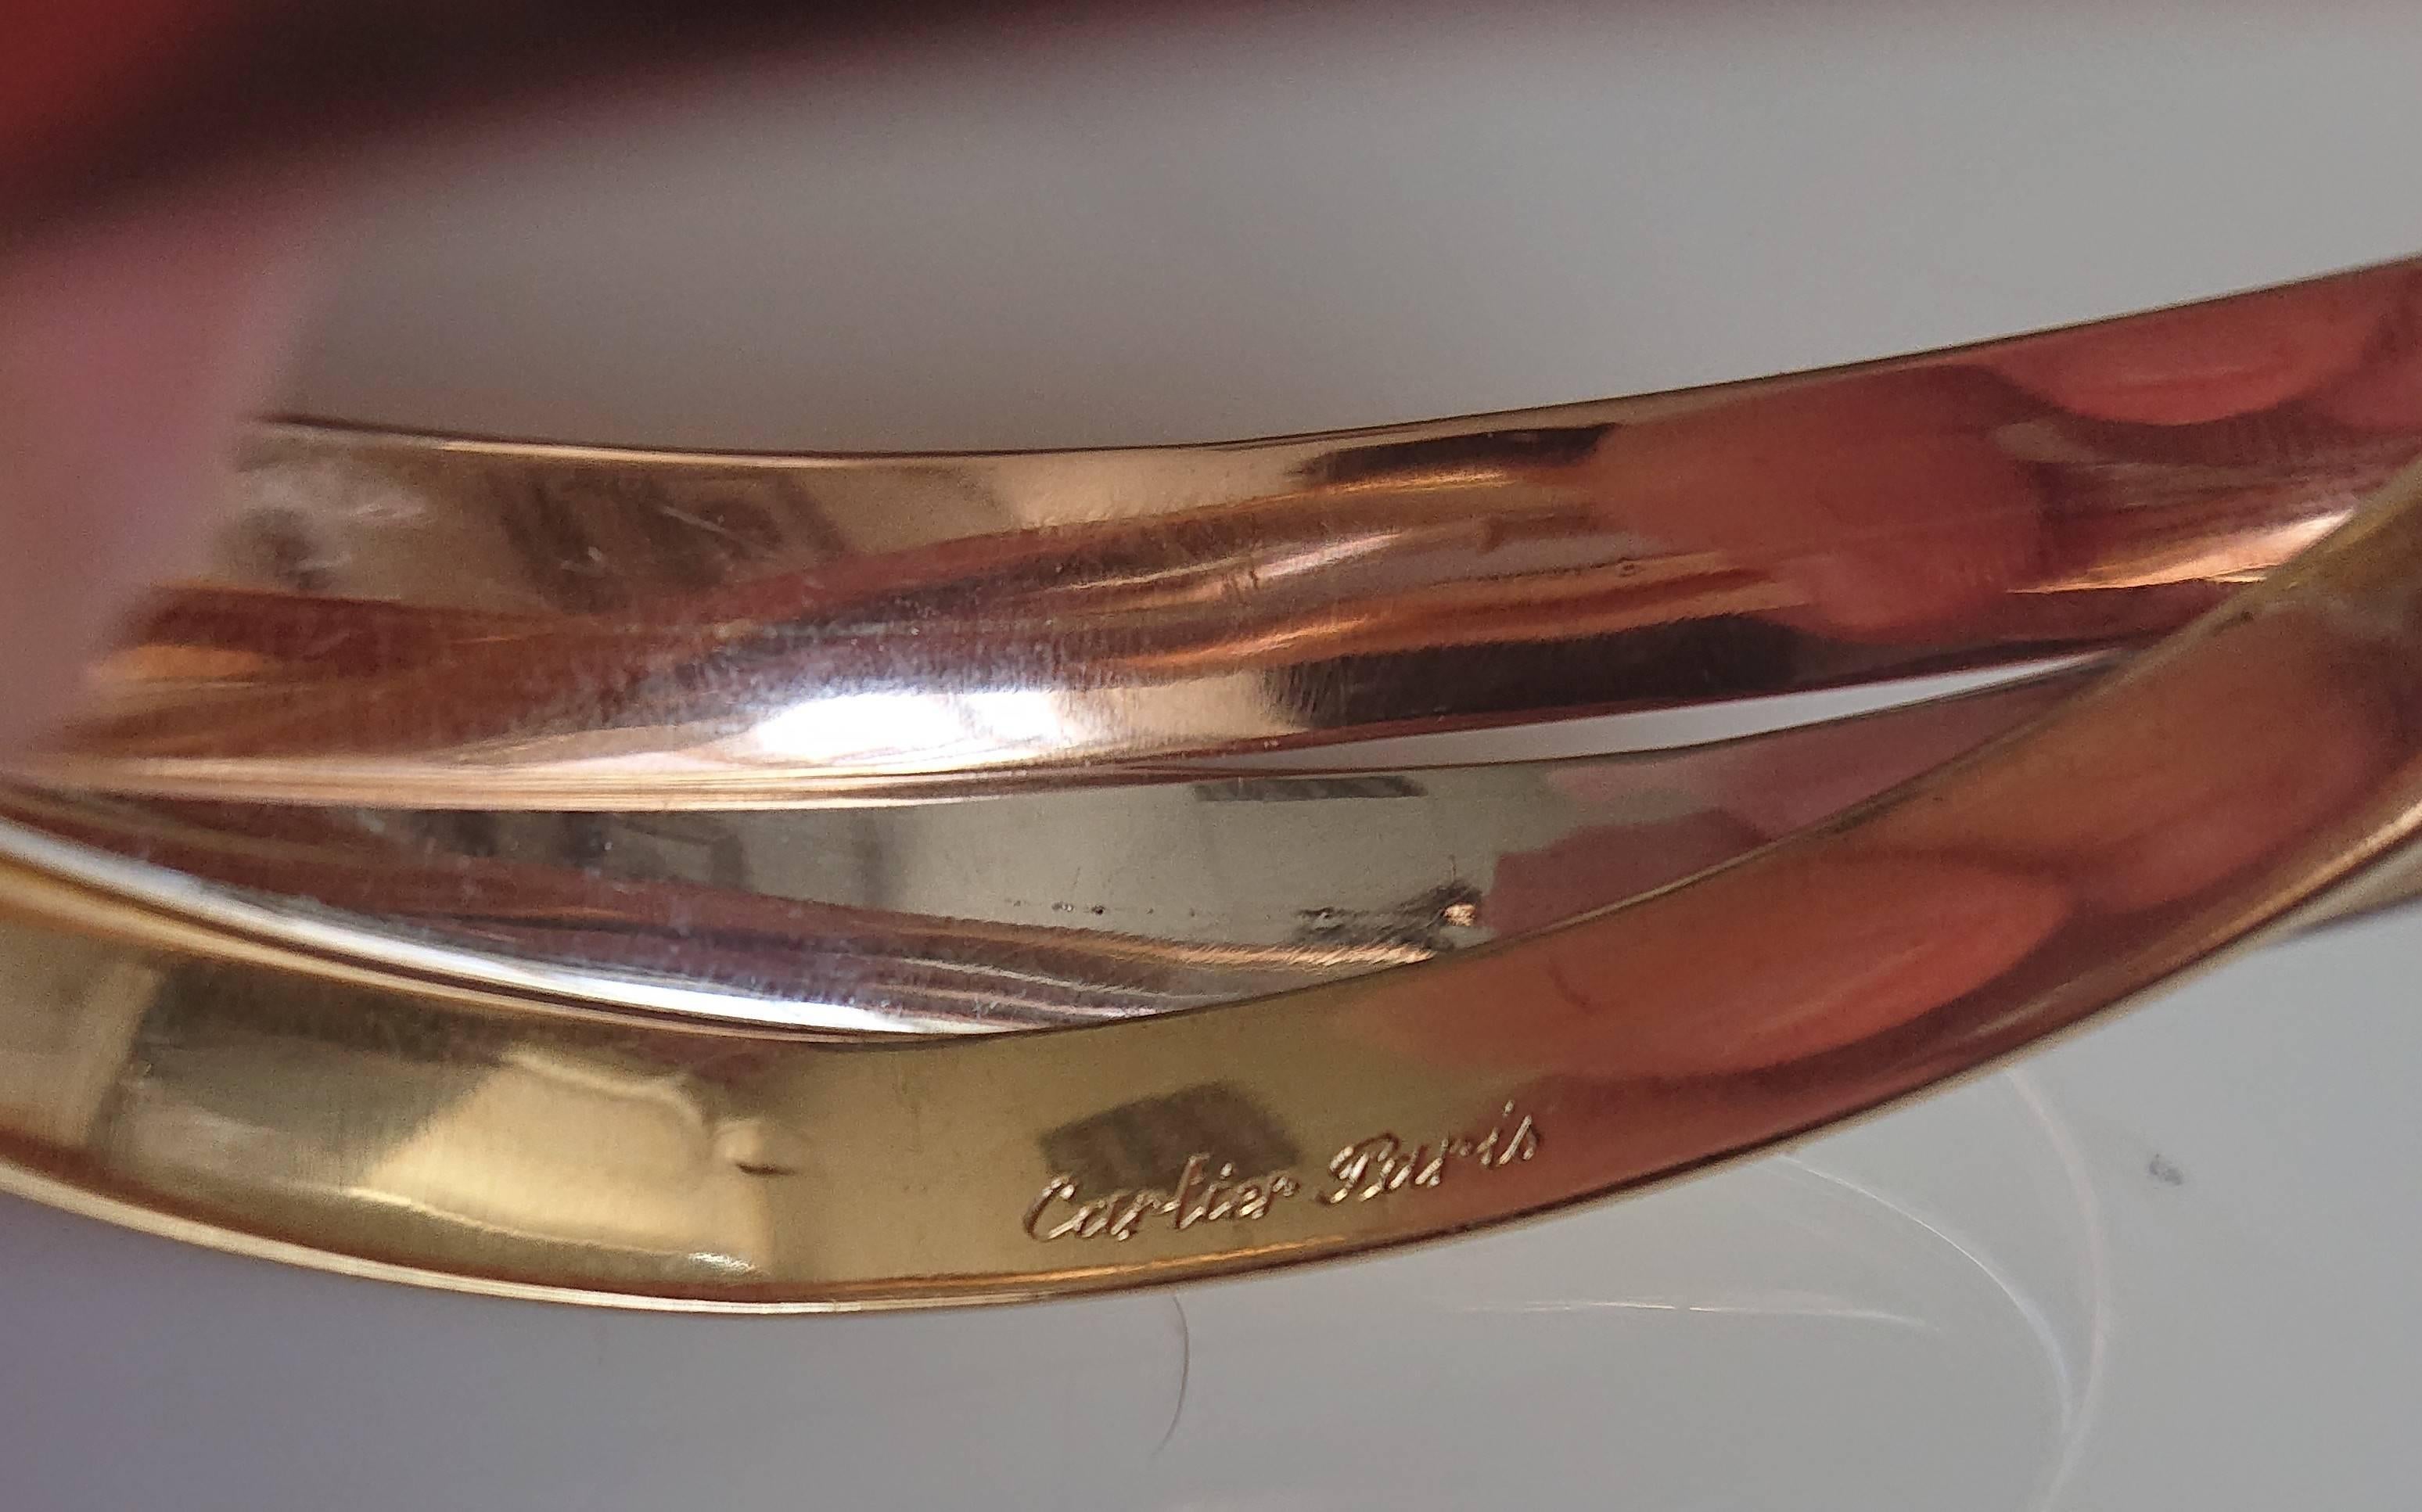 A Cartier 18 Carat Gold Trinity Bangle. Formed of 3 interlocking white gold, rose gold and yellow gold bangles. Signed 